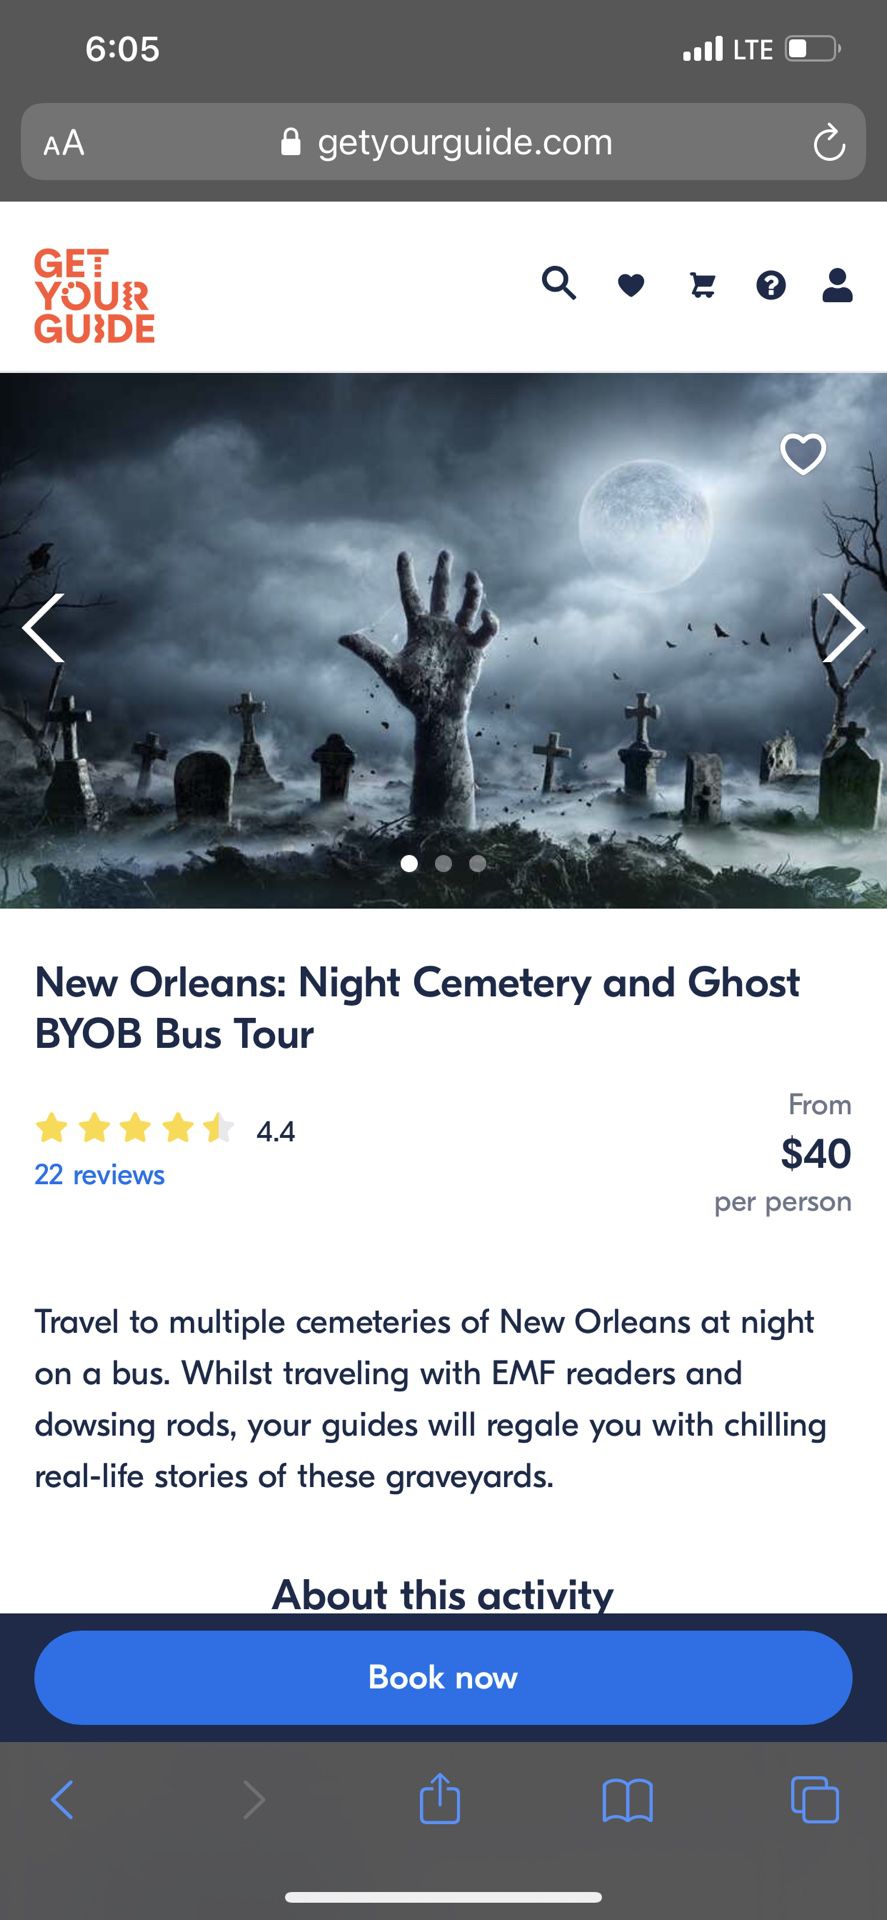 New Orleans Ghost Tour- Tickets For 2 Adults. VALID FOR ANY DATES 